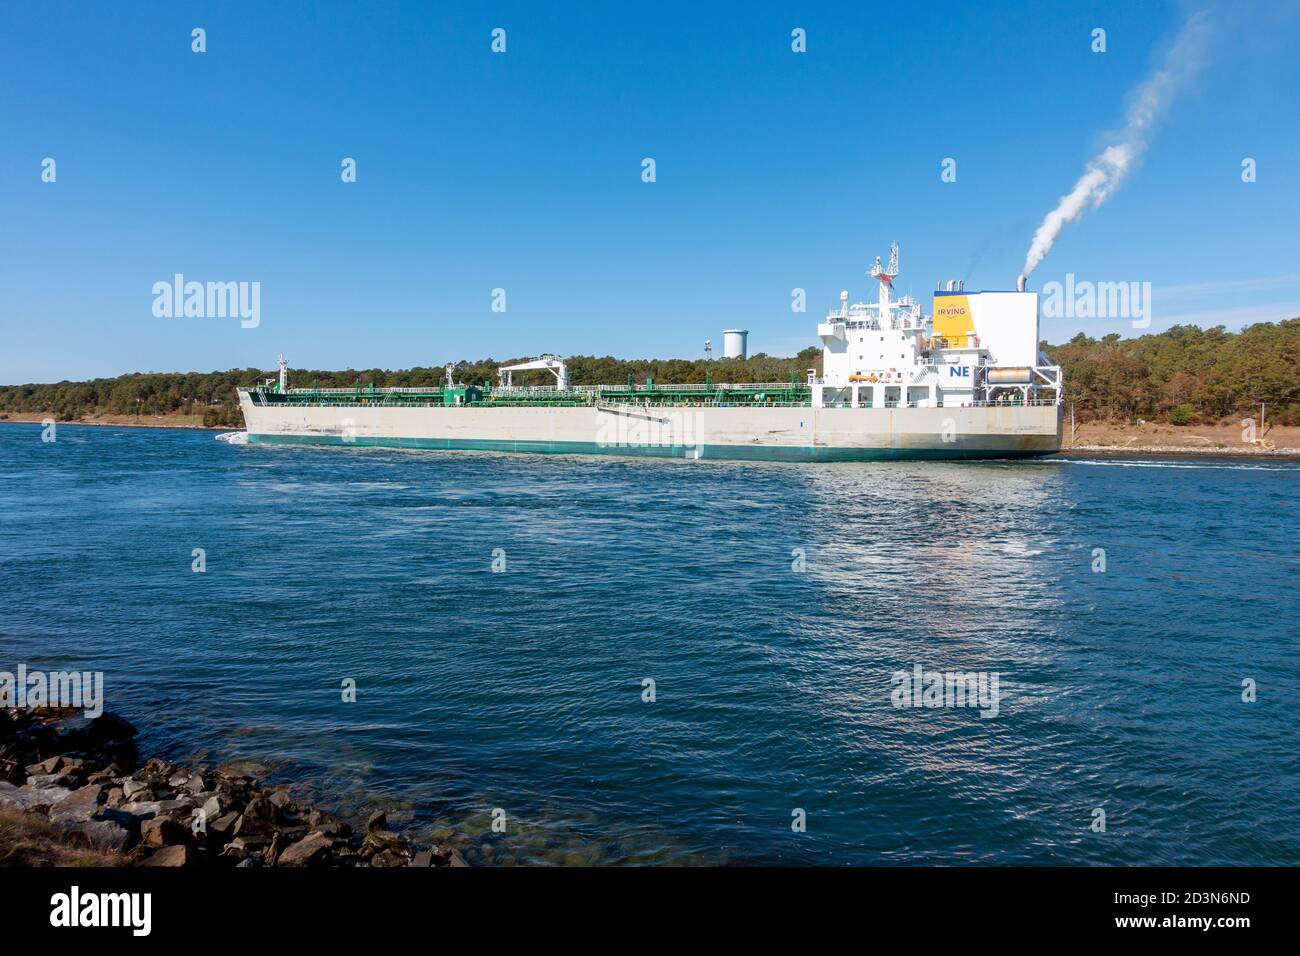 Irving Oil Company tanker ship New England in the Cape Cod Canal Stock Photo